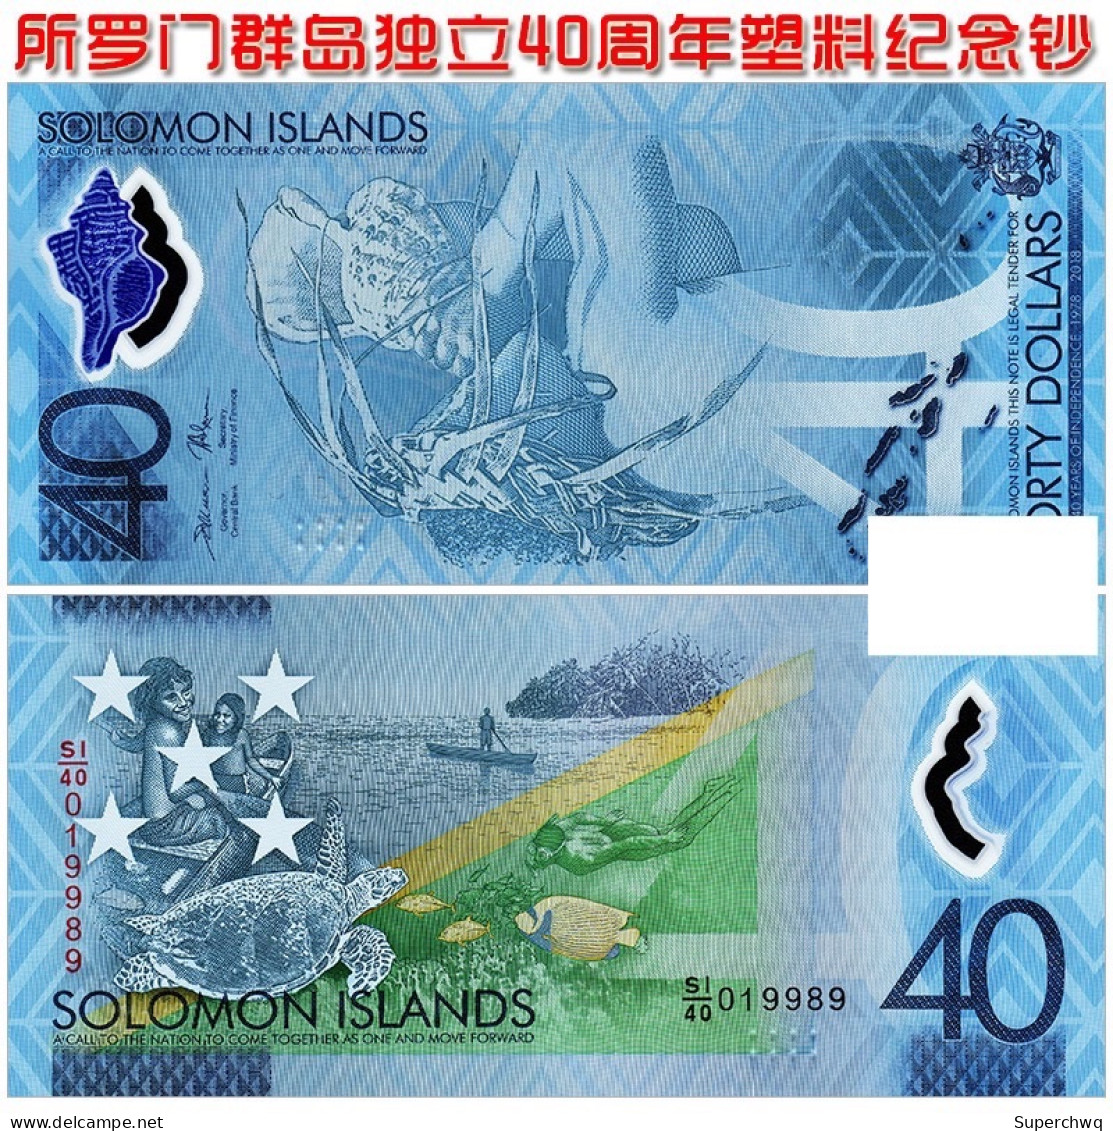 Oceania Solomon Islands 40 Yuan 2018 Independence 40th Anniversary Plastic Commemorative Note， Approximately 145 X67mm I - Solomonen